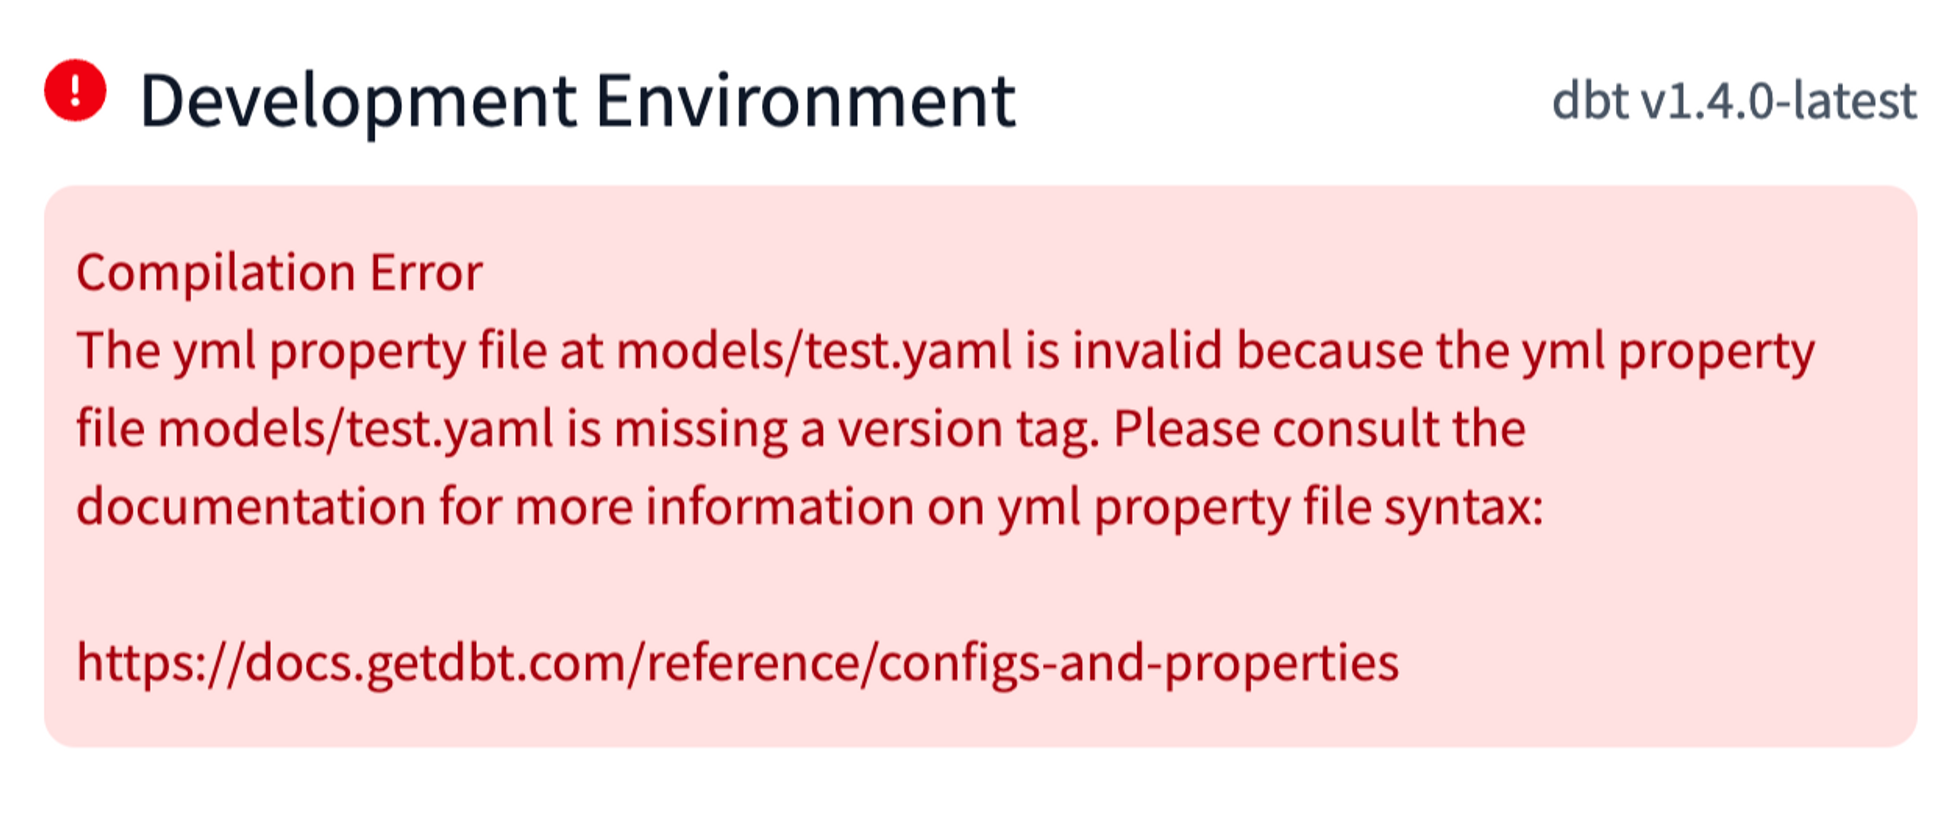 the YAML property file is missing a version tag